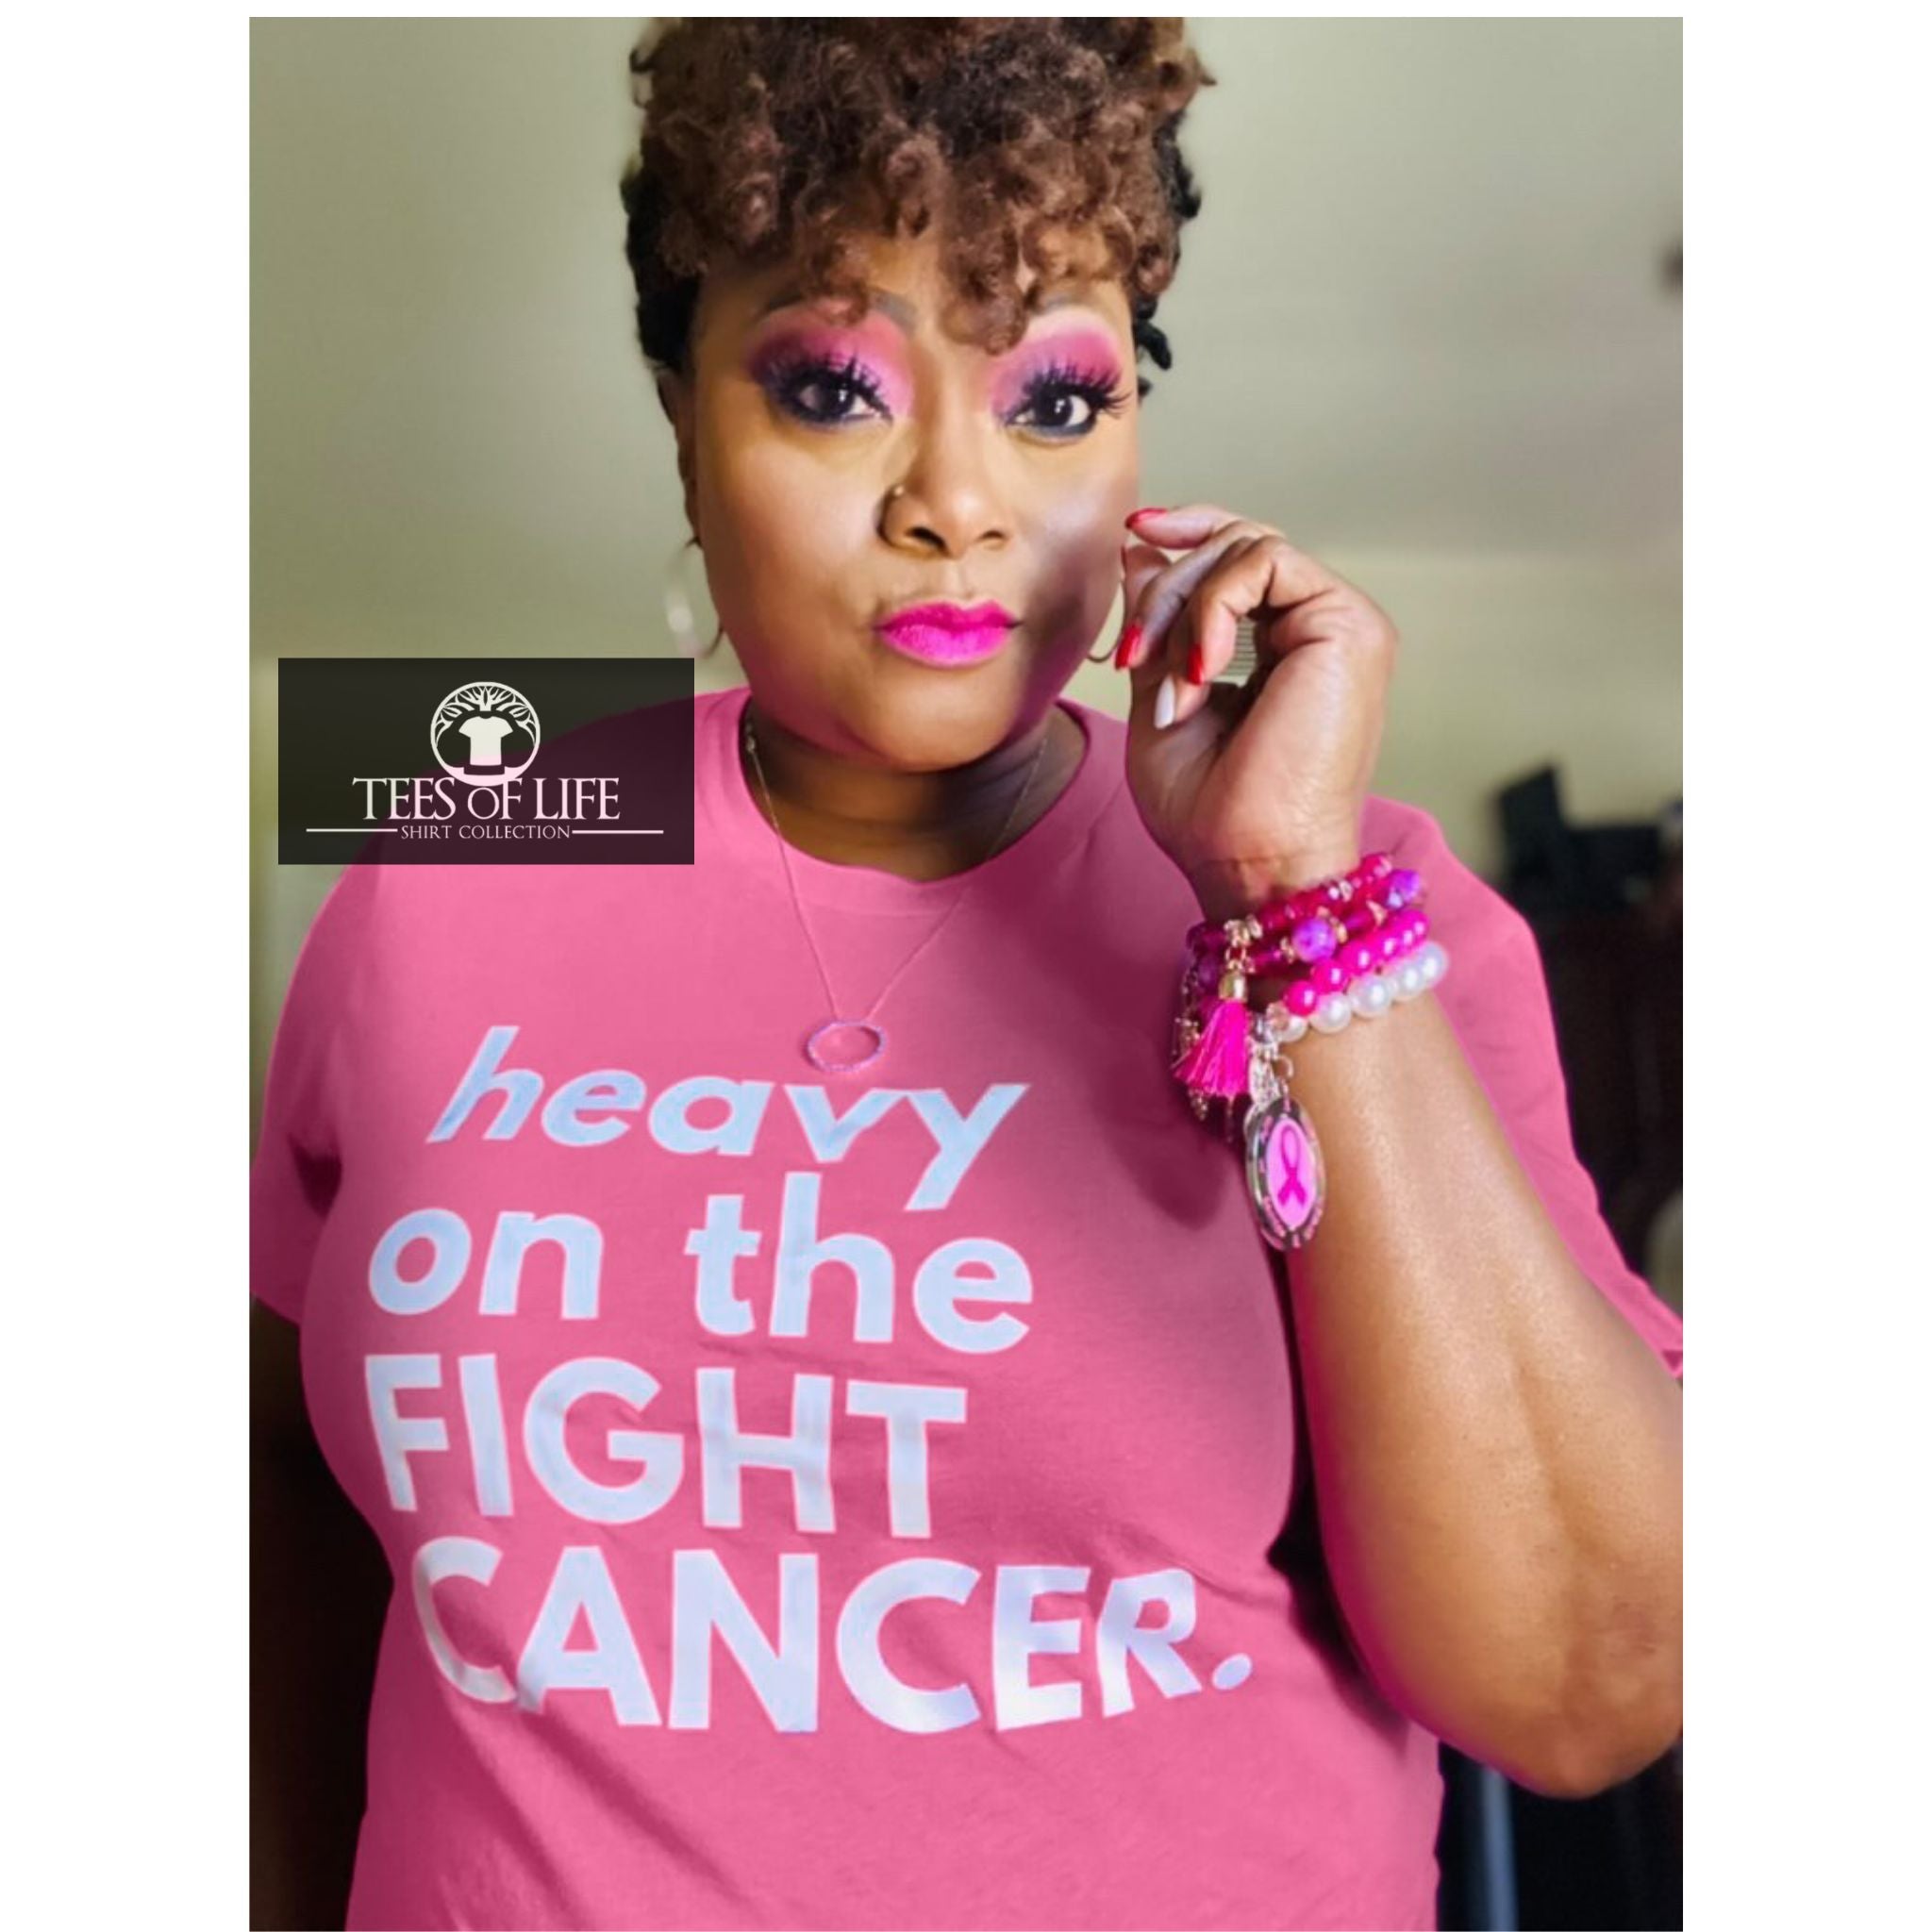 Heavy On The Fight Cancer Unisex Tee